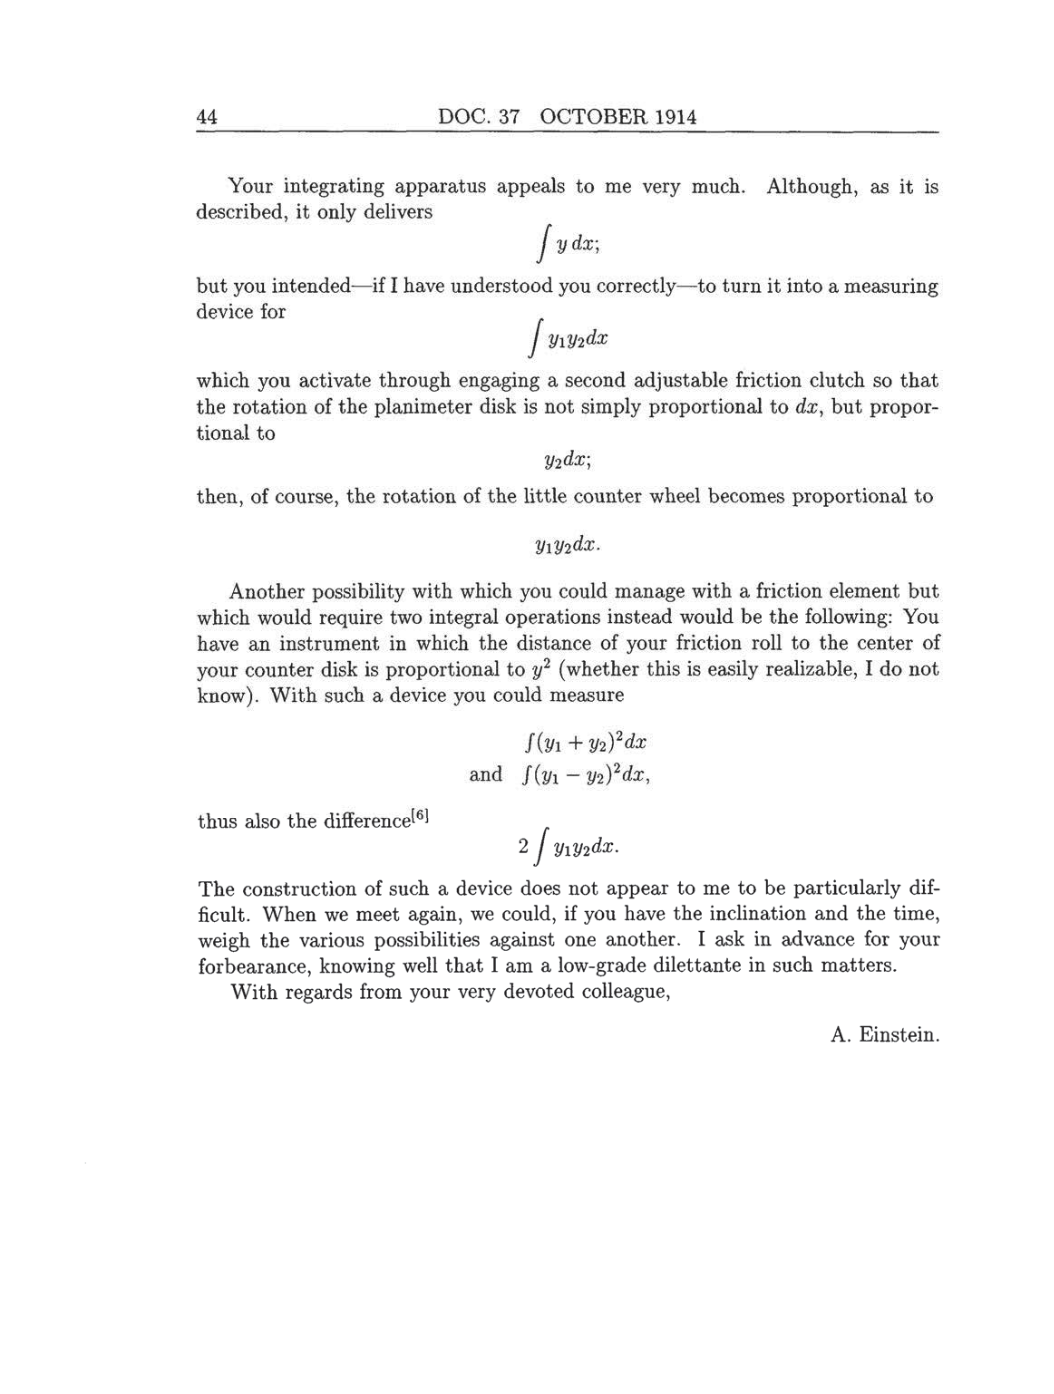 Volume 8: The Berlin Years: Correspondence, 1914-1918 (English translation supplement) page 44